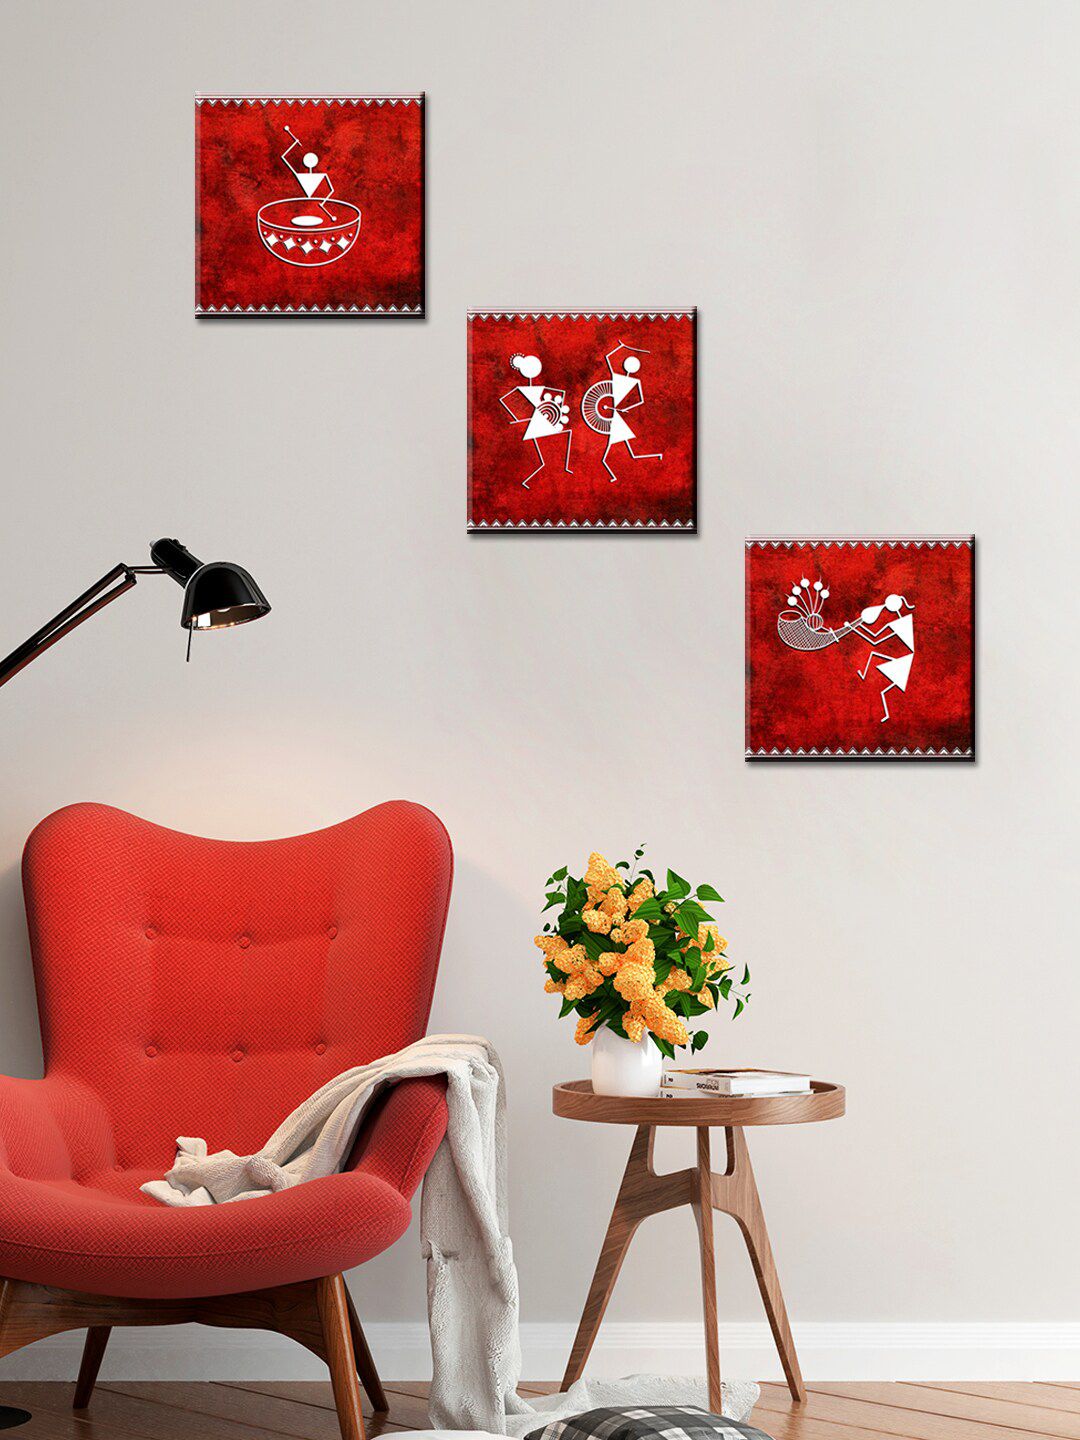 WALLMANTRA Set Of 3 Red & White Warli Folk Art Wall Painting Price in India